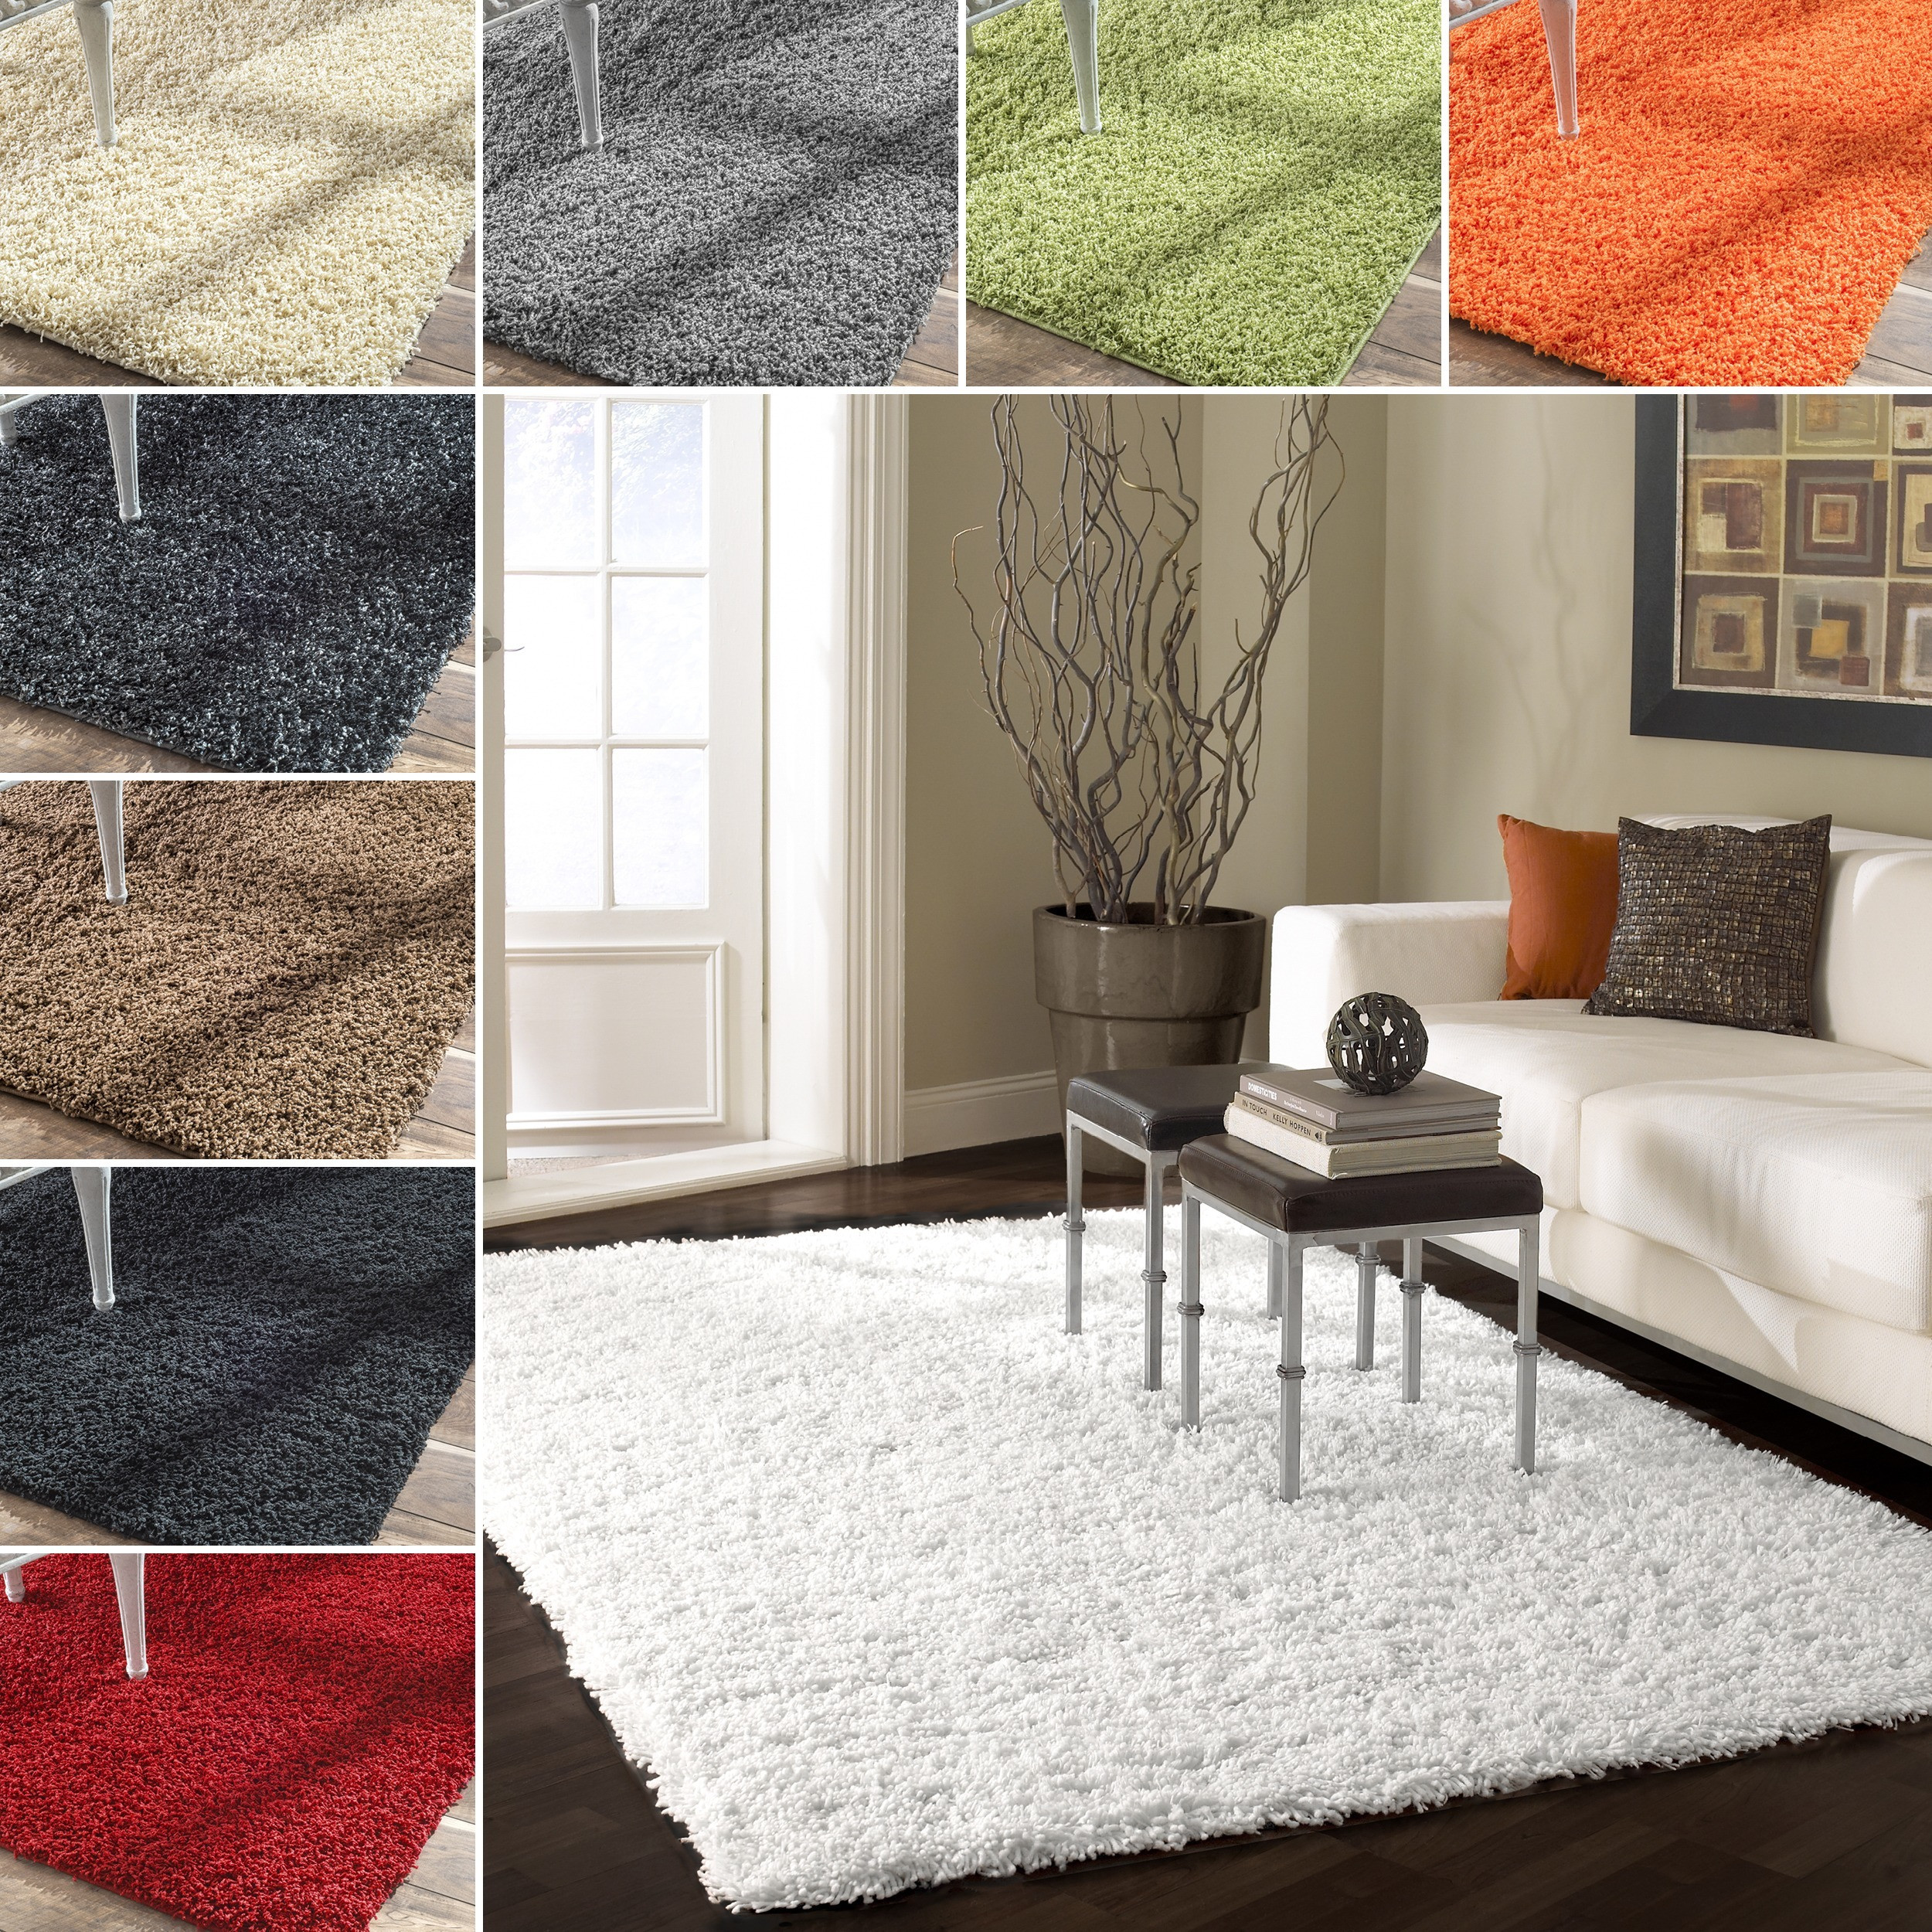 Lowes Living Room Rugs
 Home Decor Extravagant 8 X 10 Area Rugs For Indoor Area